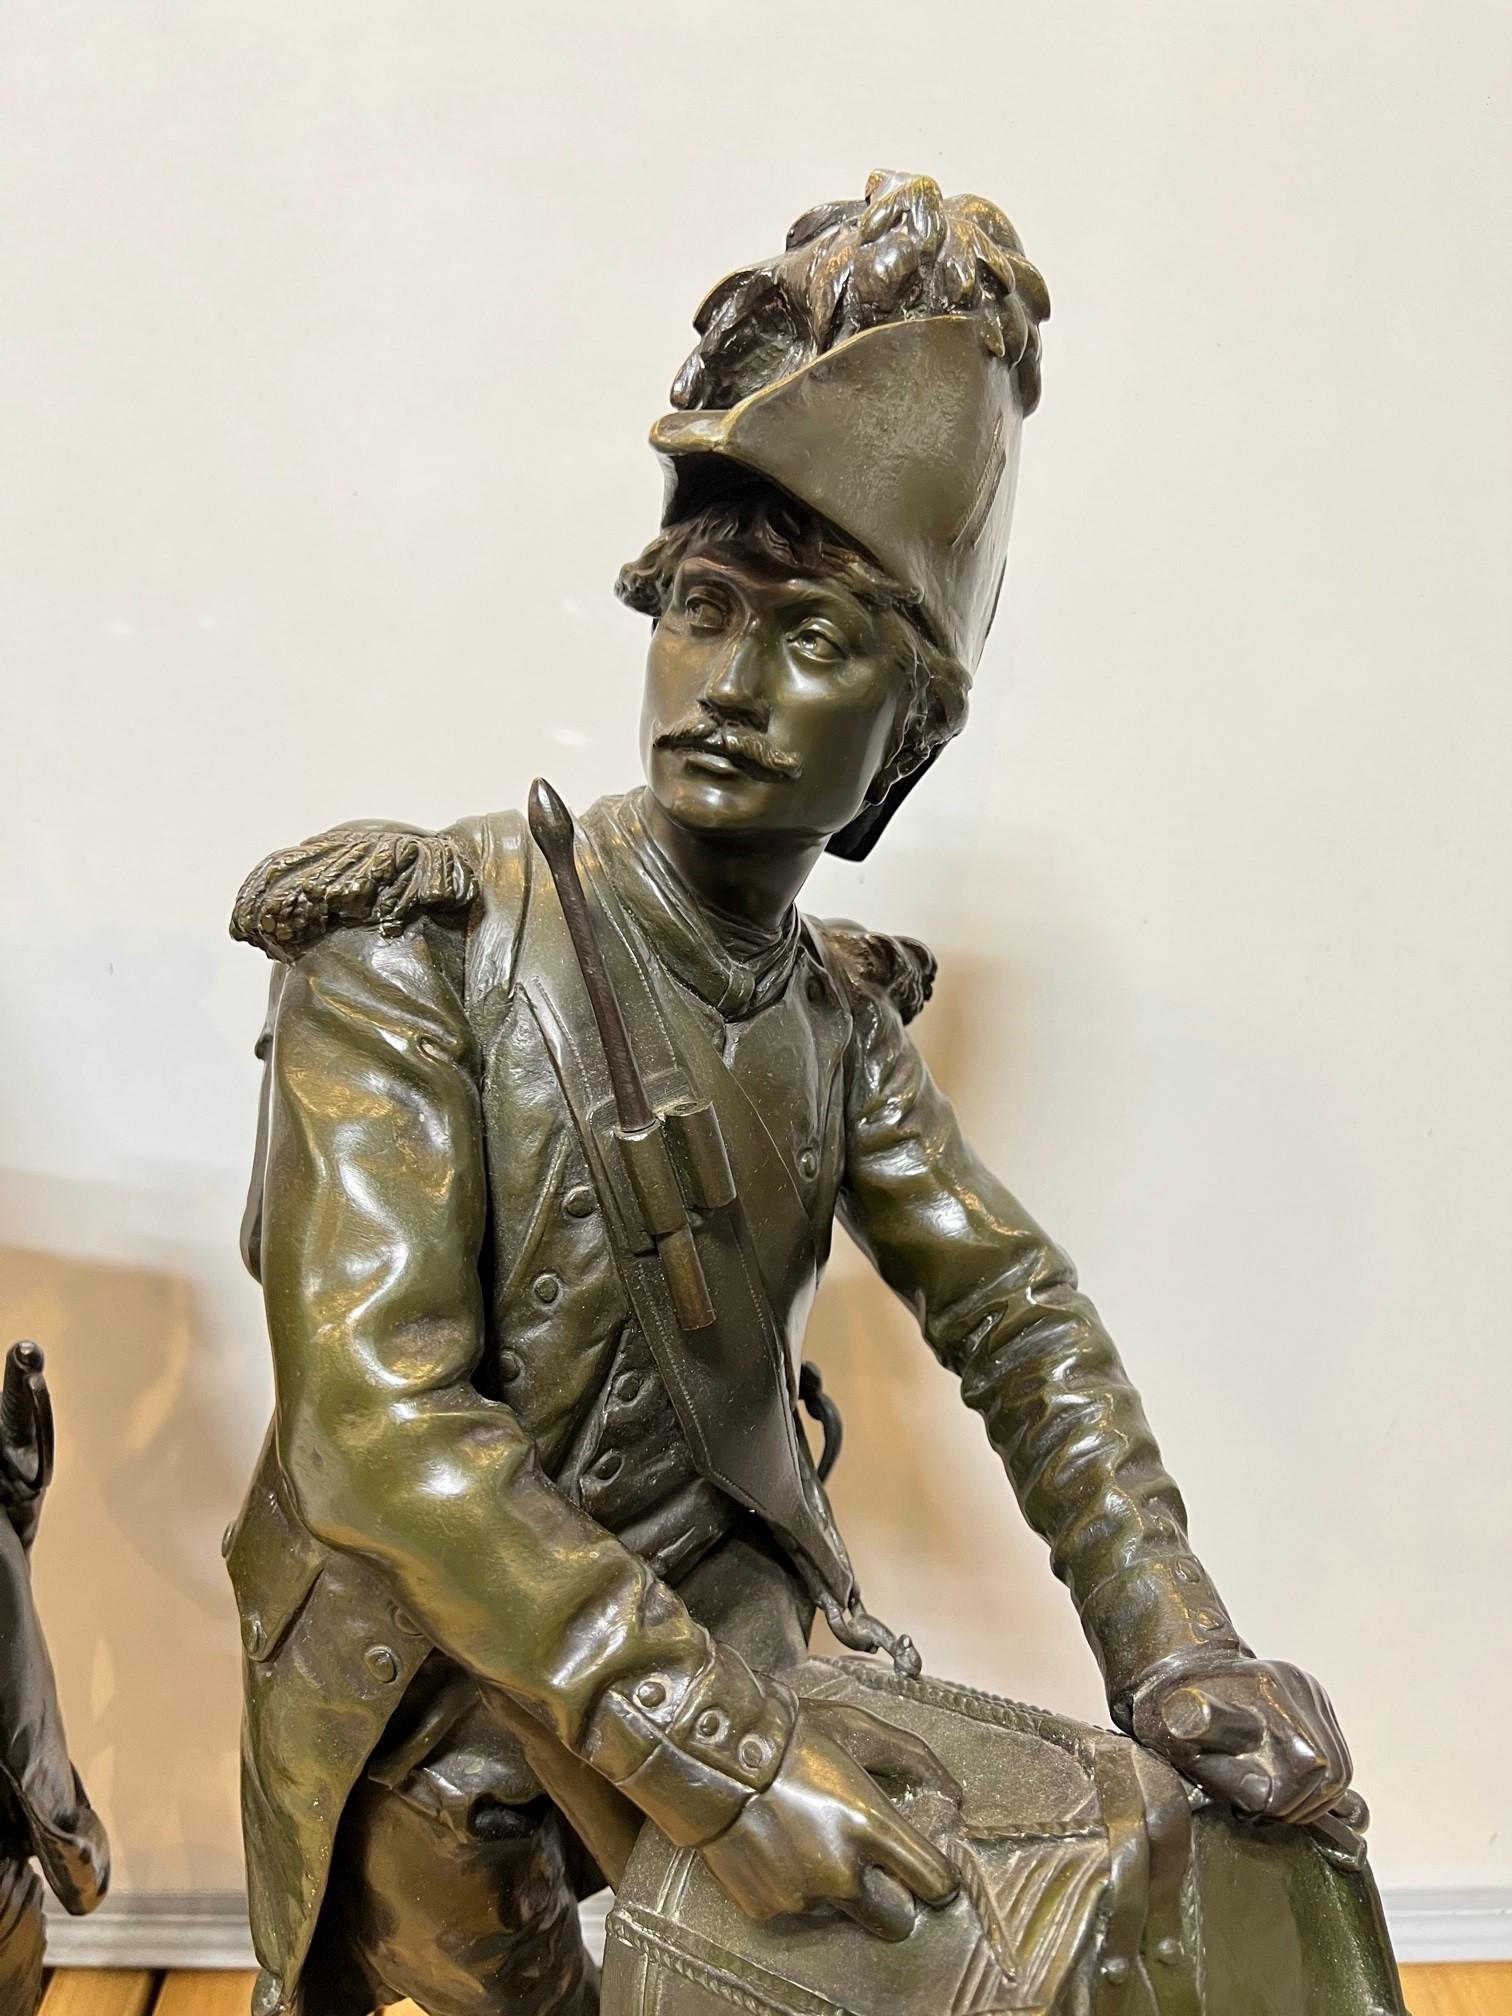 Late 19th century pair of bronze French soldiers by Etienne Henri Dumaige. Representing two separate moments in the French Revolution, the uprising against Louis XV, and the fall of the monarchy in 1792. One of the soldiers is an infantryman smoking